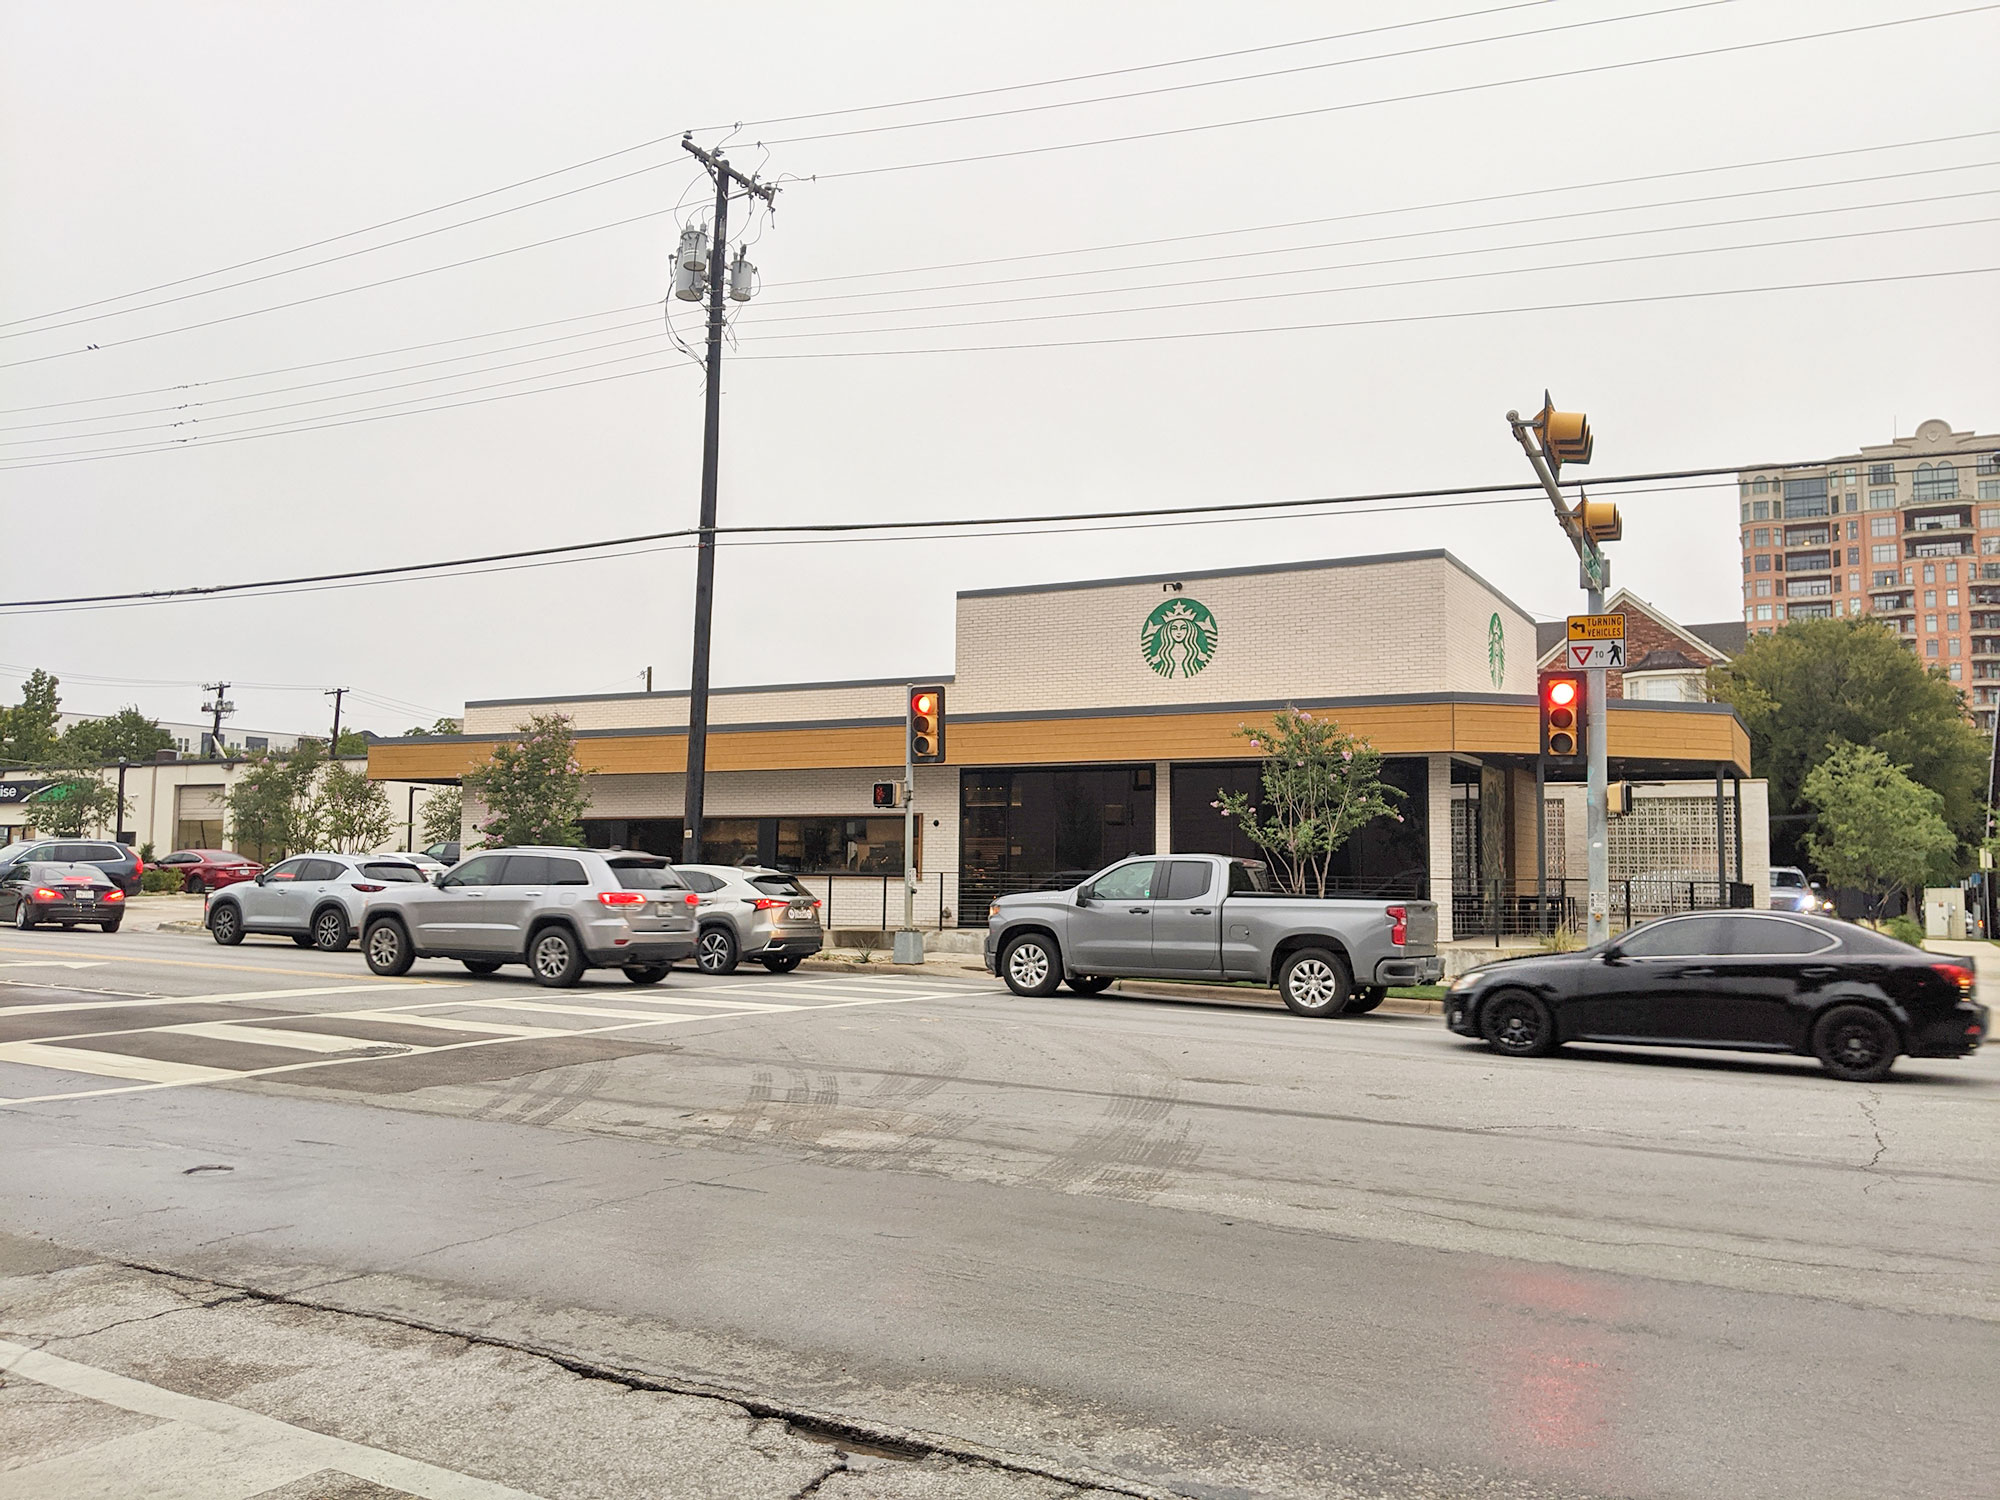 A traffic jam on Oak Lawn Avenue caused by the new Starbucks Store.